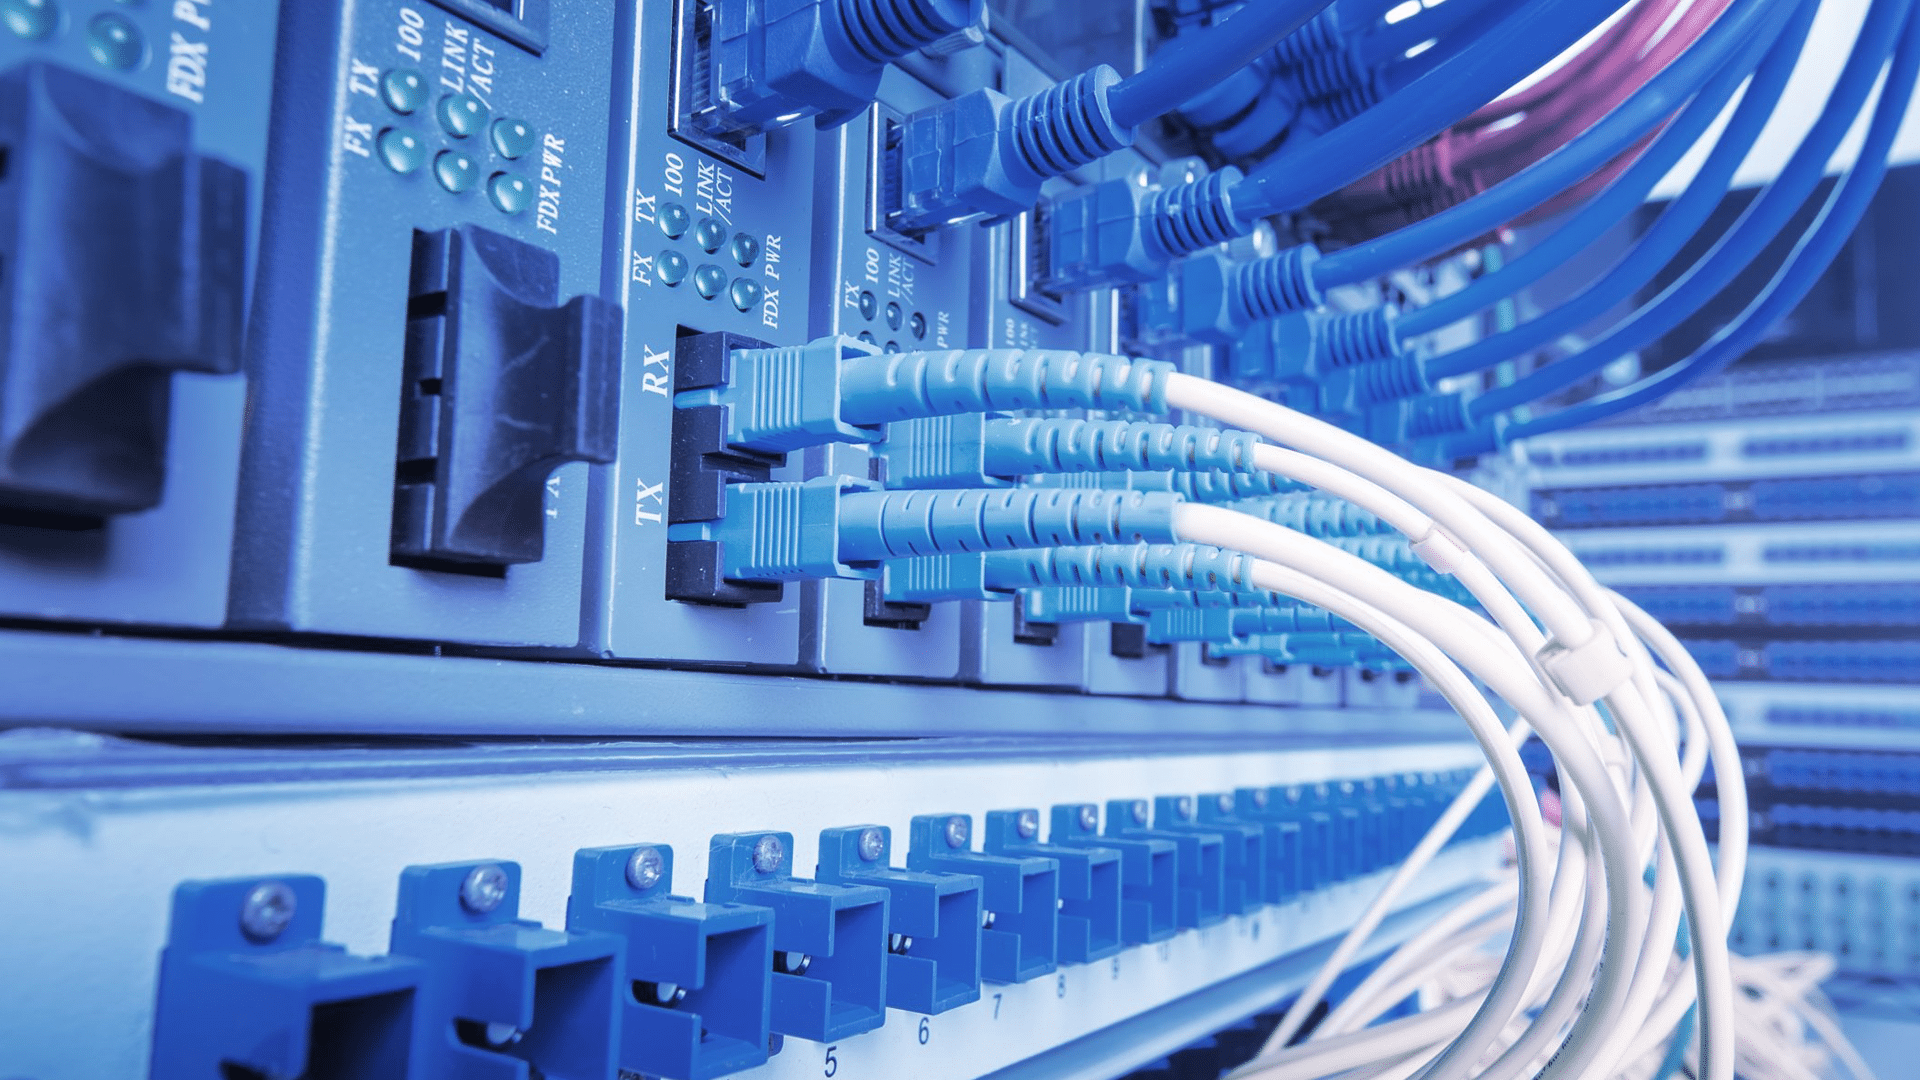 Several white and blue cables plugged into data center equipment